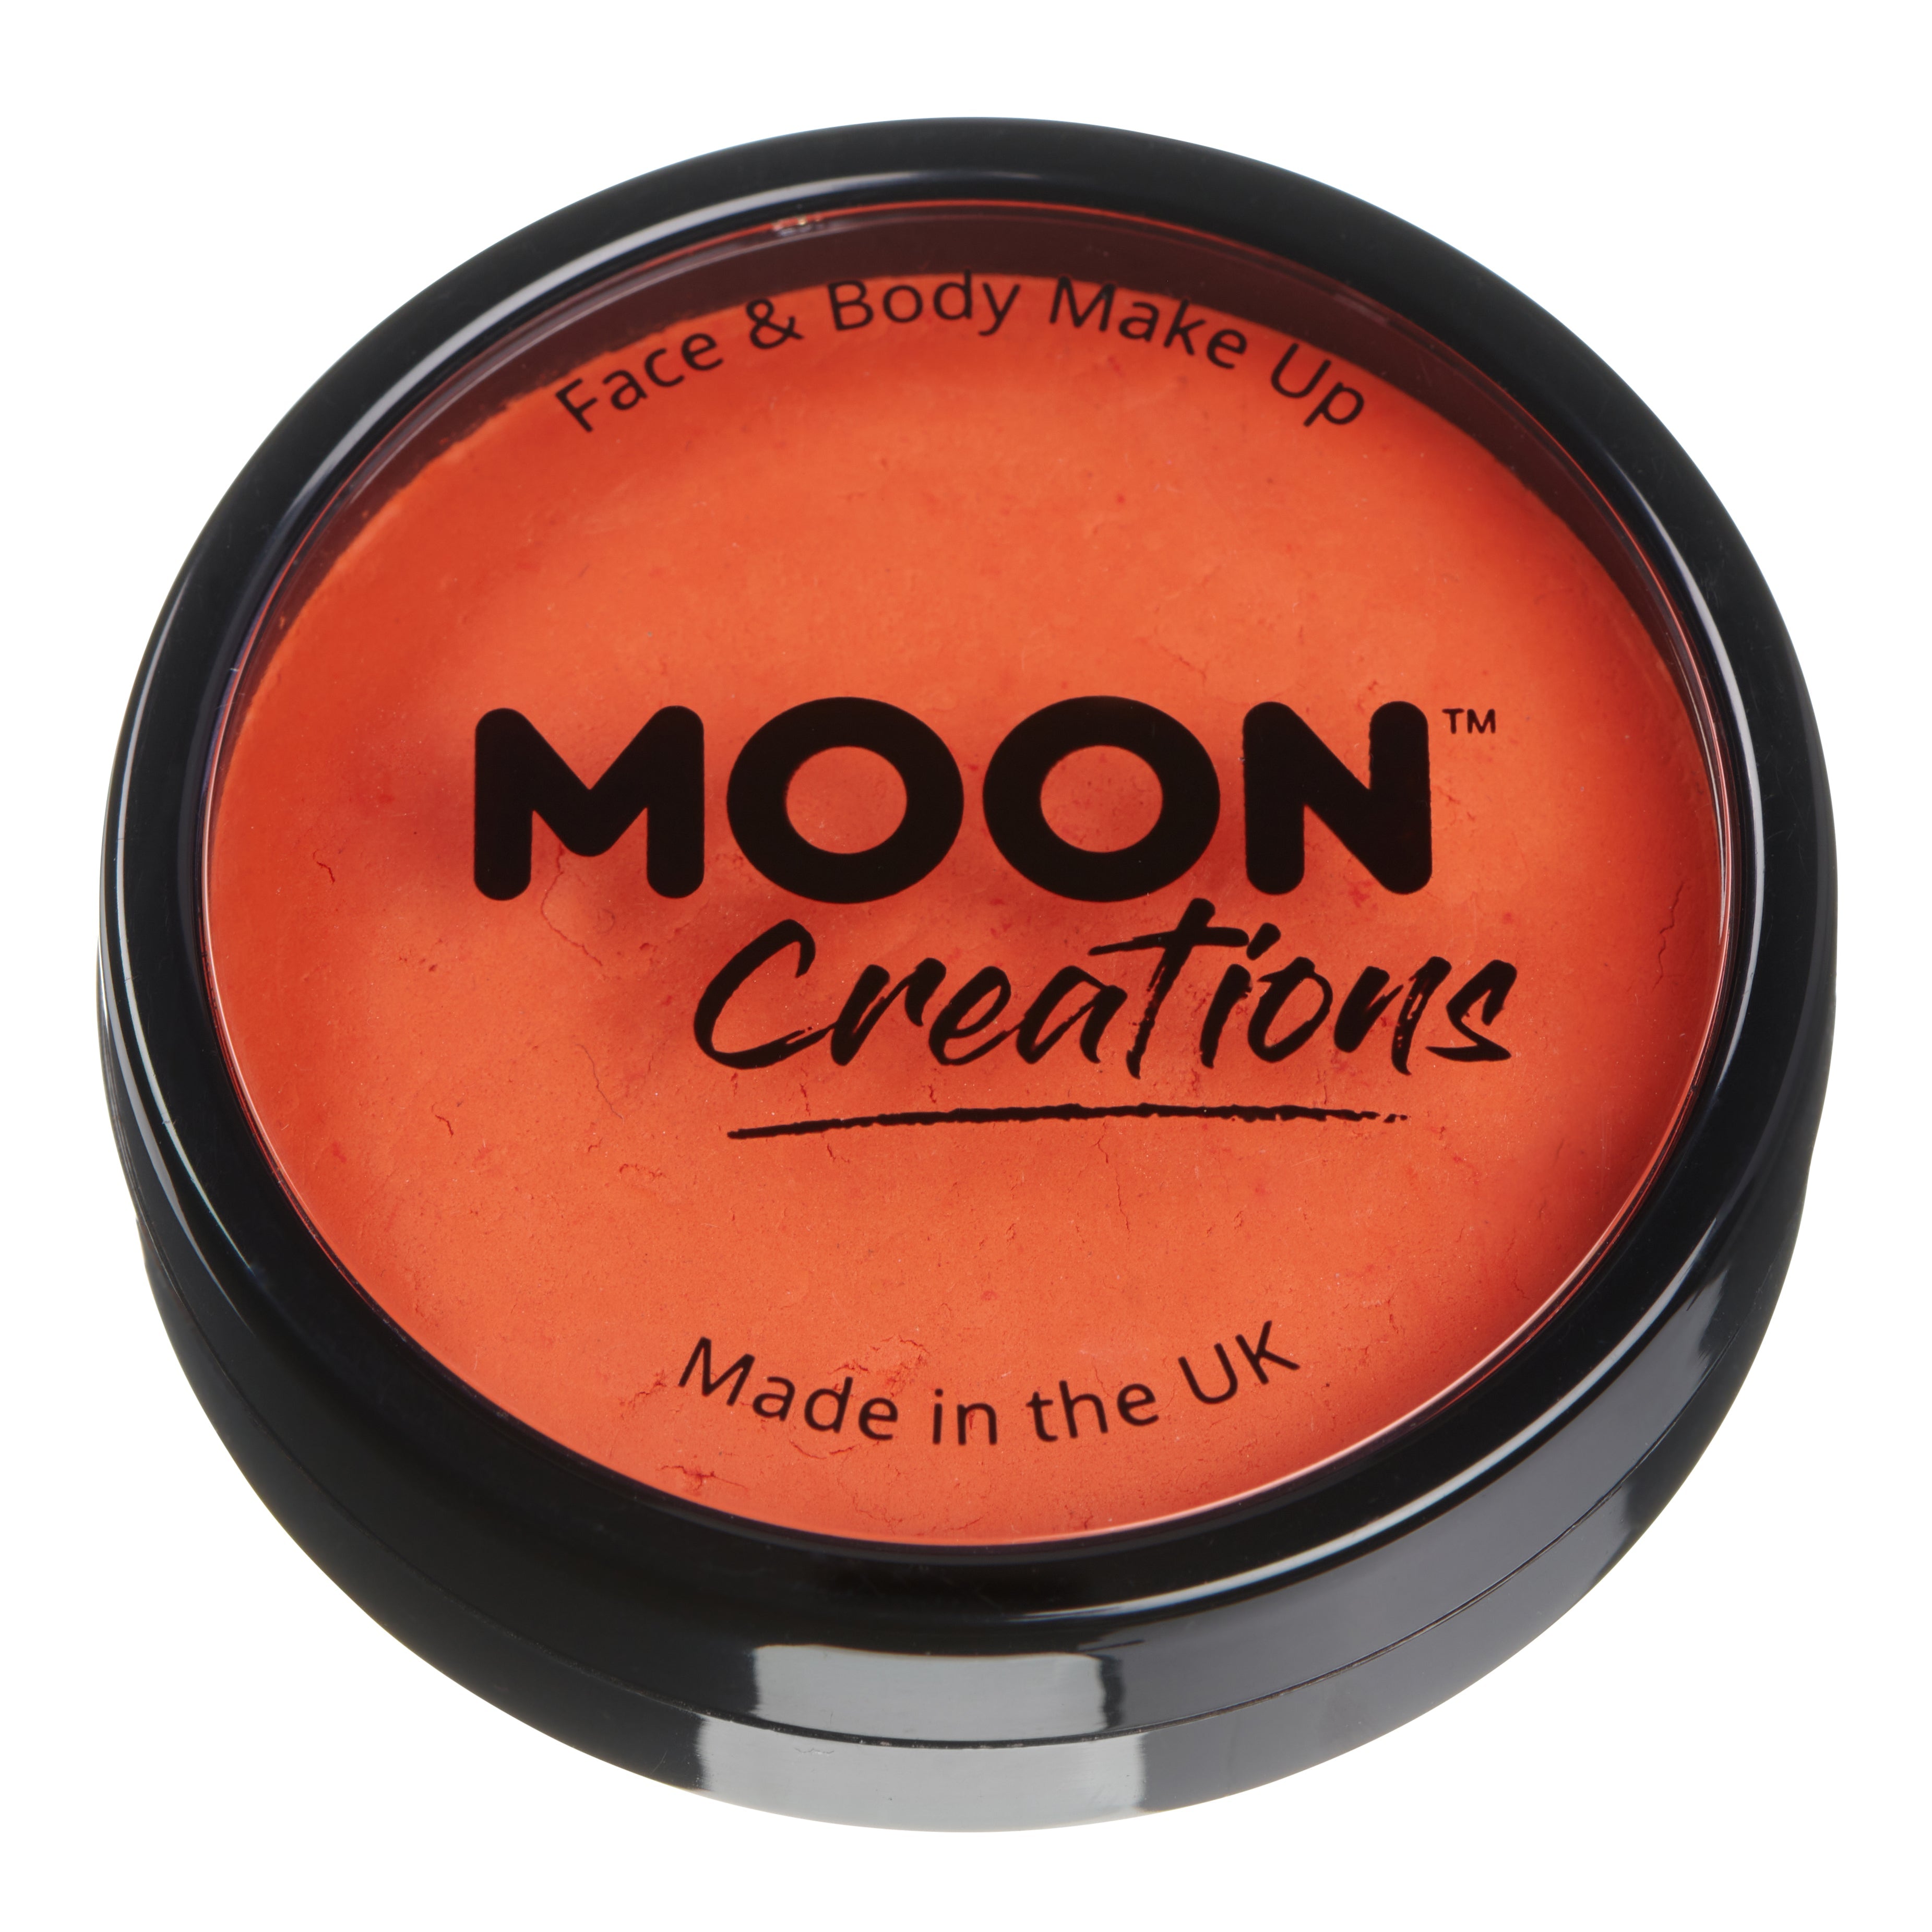 Dark Orange - Professional Face Paint, 36g. Cosmetically certified, FDA & Health Canada compliant, cruelty free and vegan.